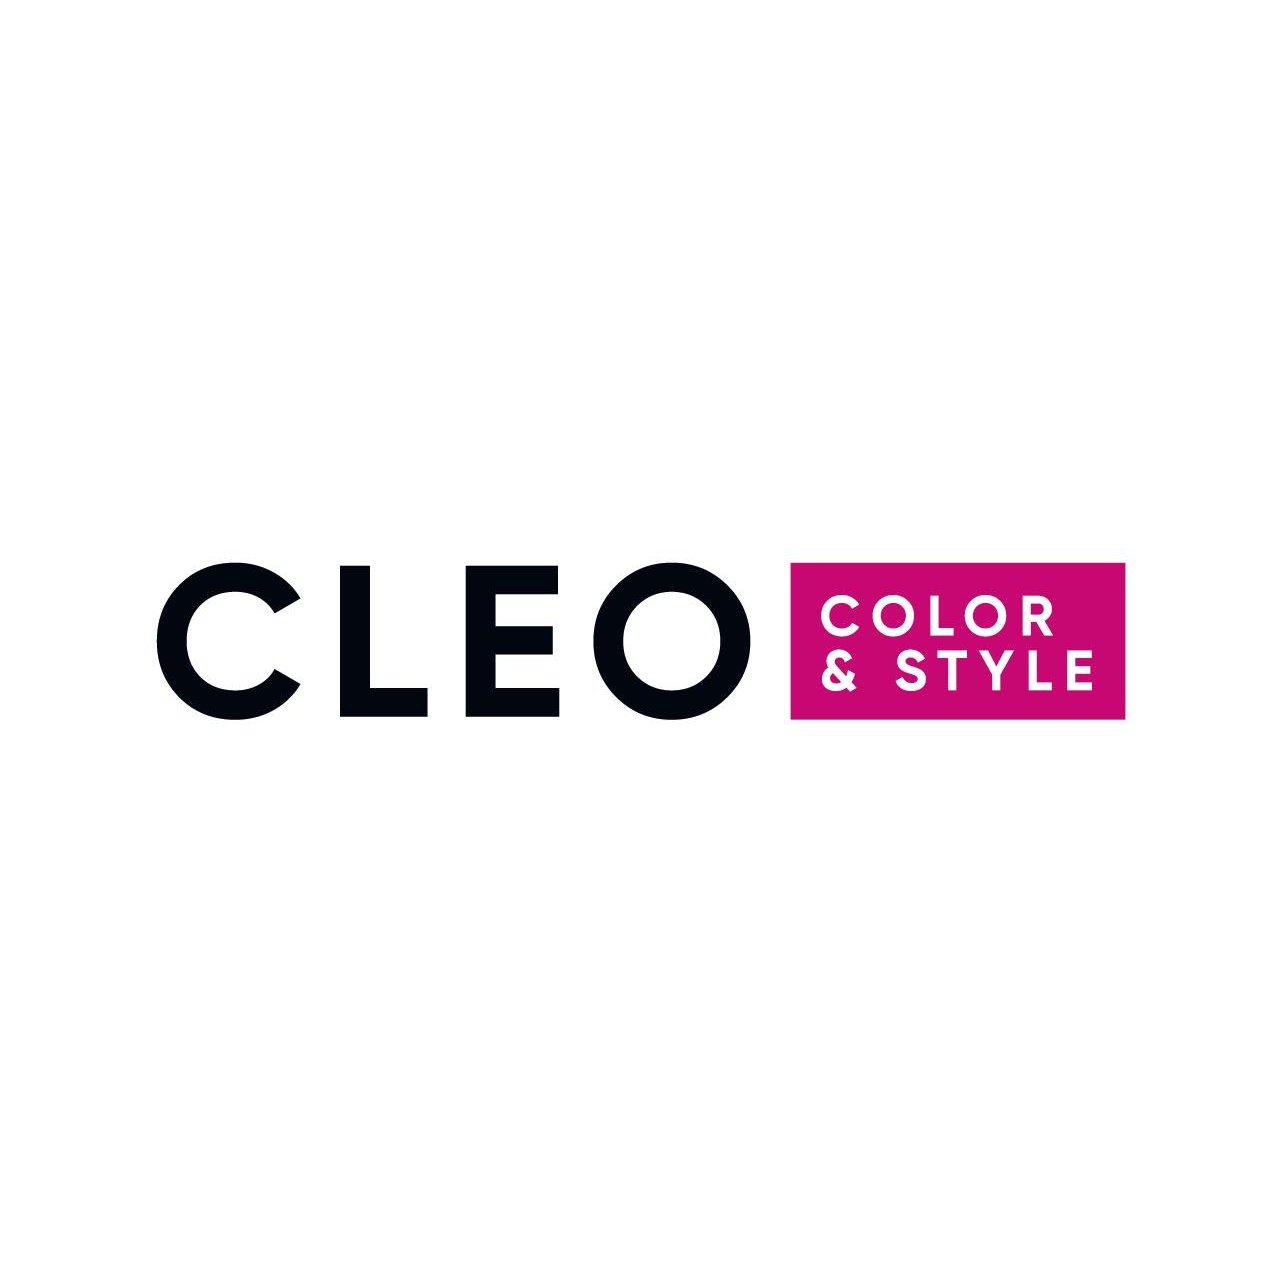 Logo Cleo Color & Style